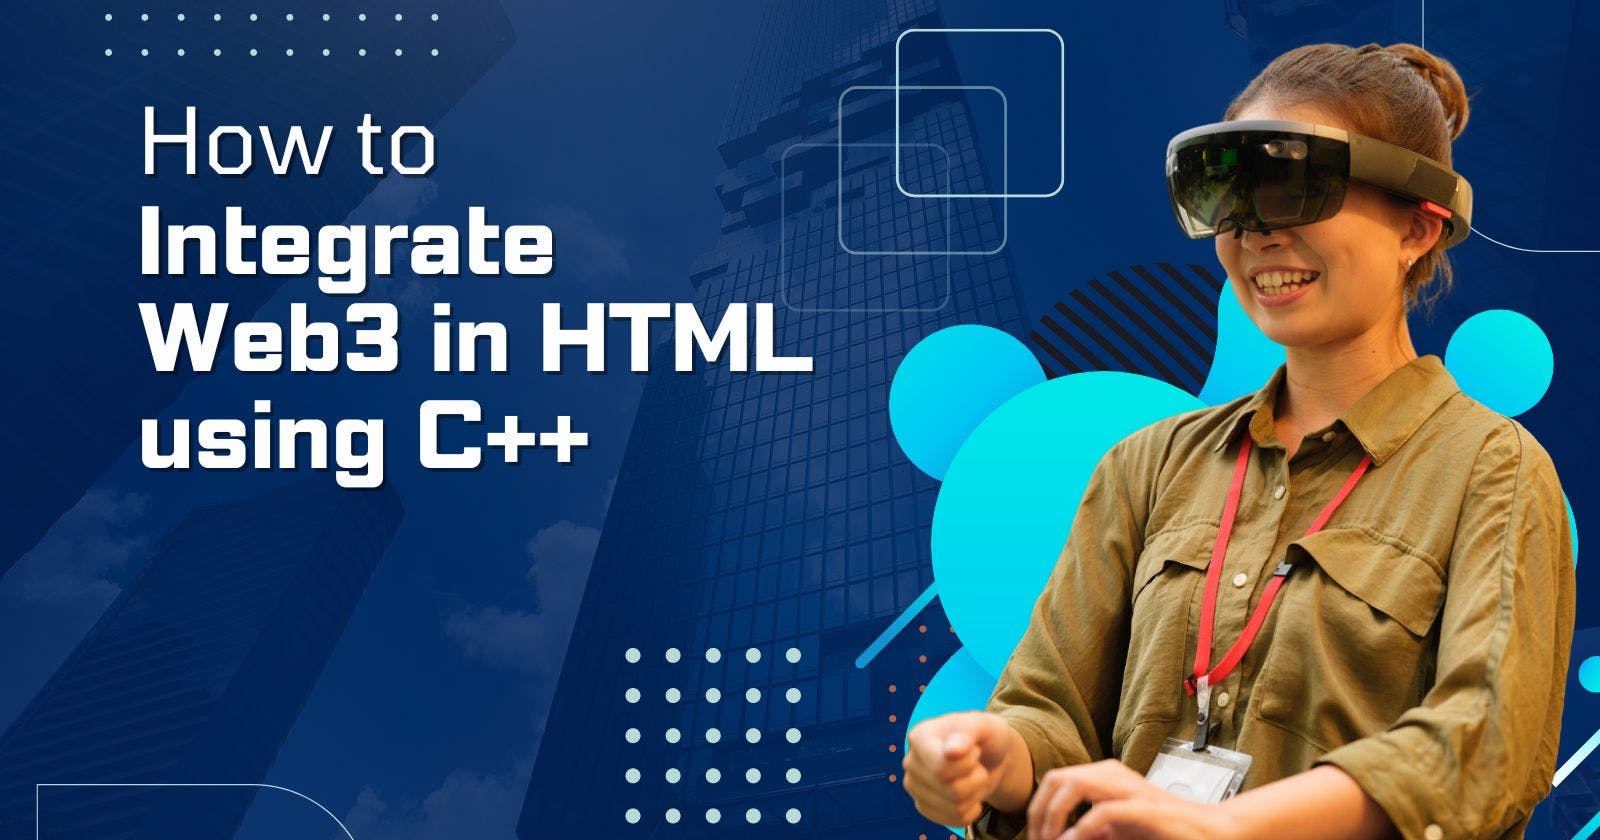 How to Integrate Web3 in HTML using C++